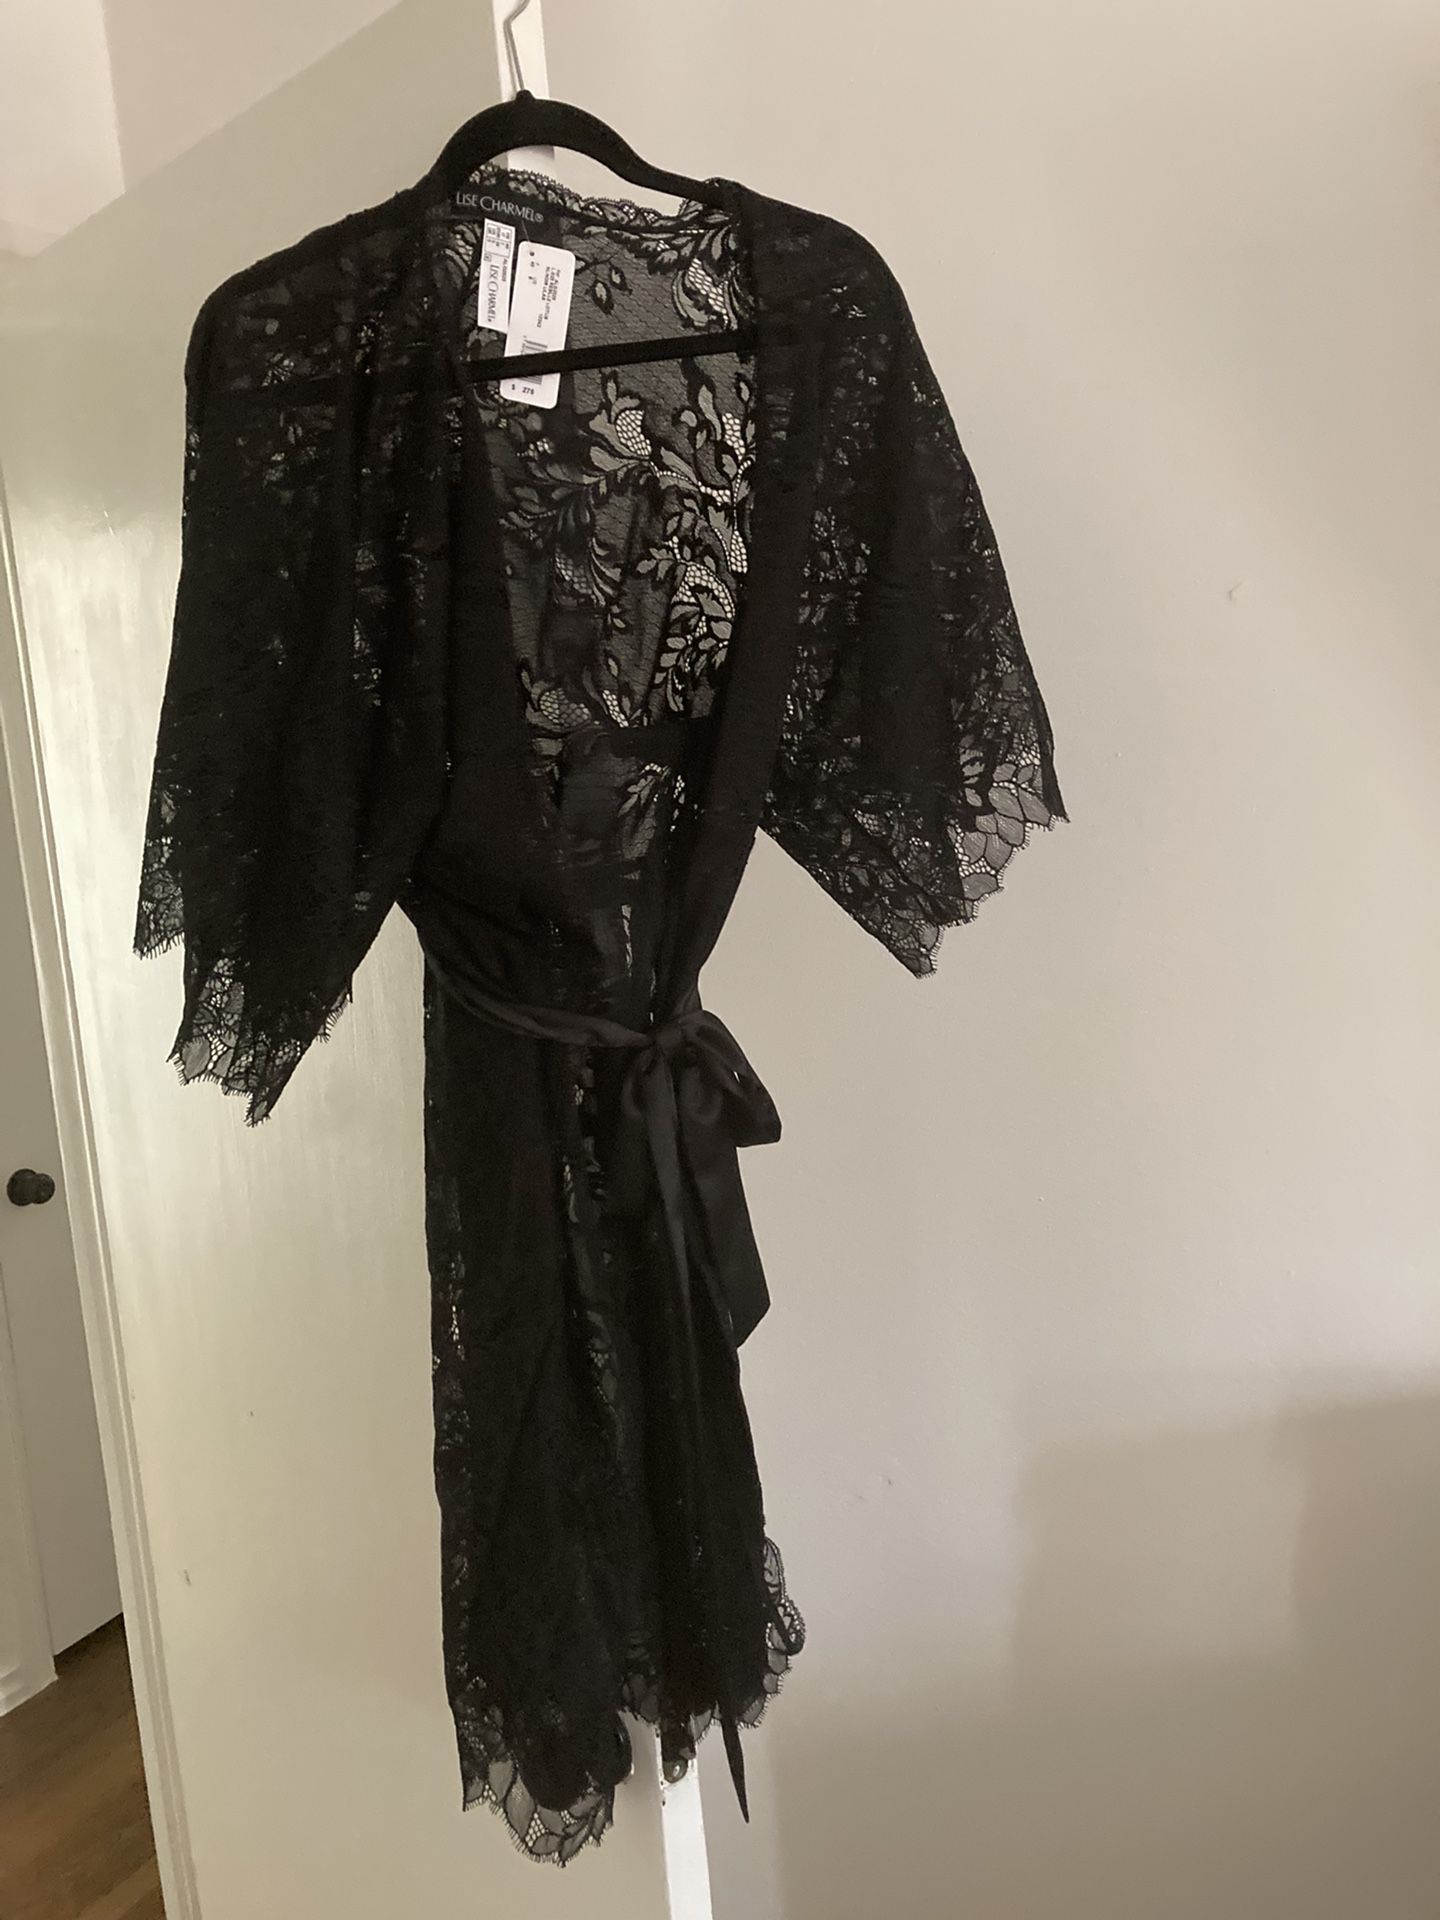 Lise Charmel "Dressing Floral" robe in lace.  brand new with tags 